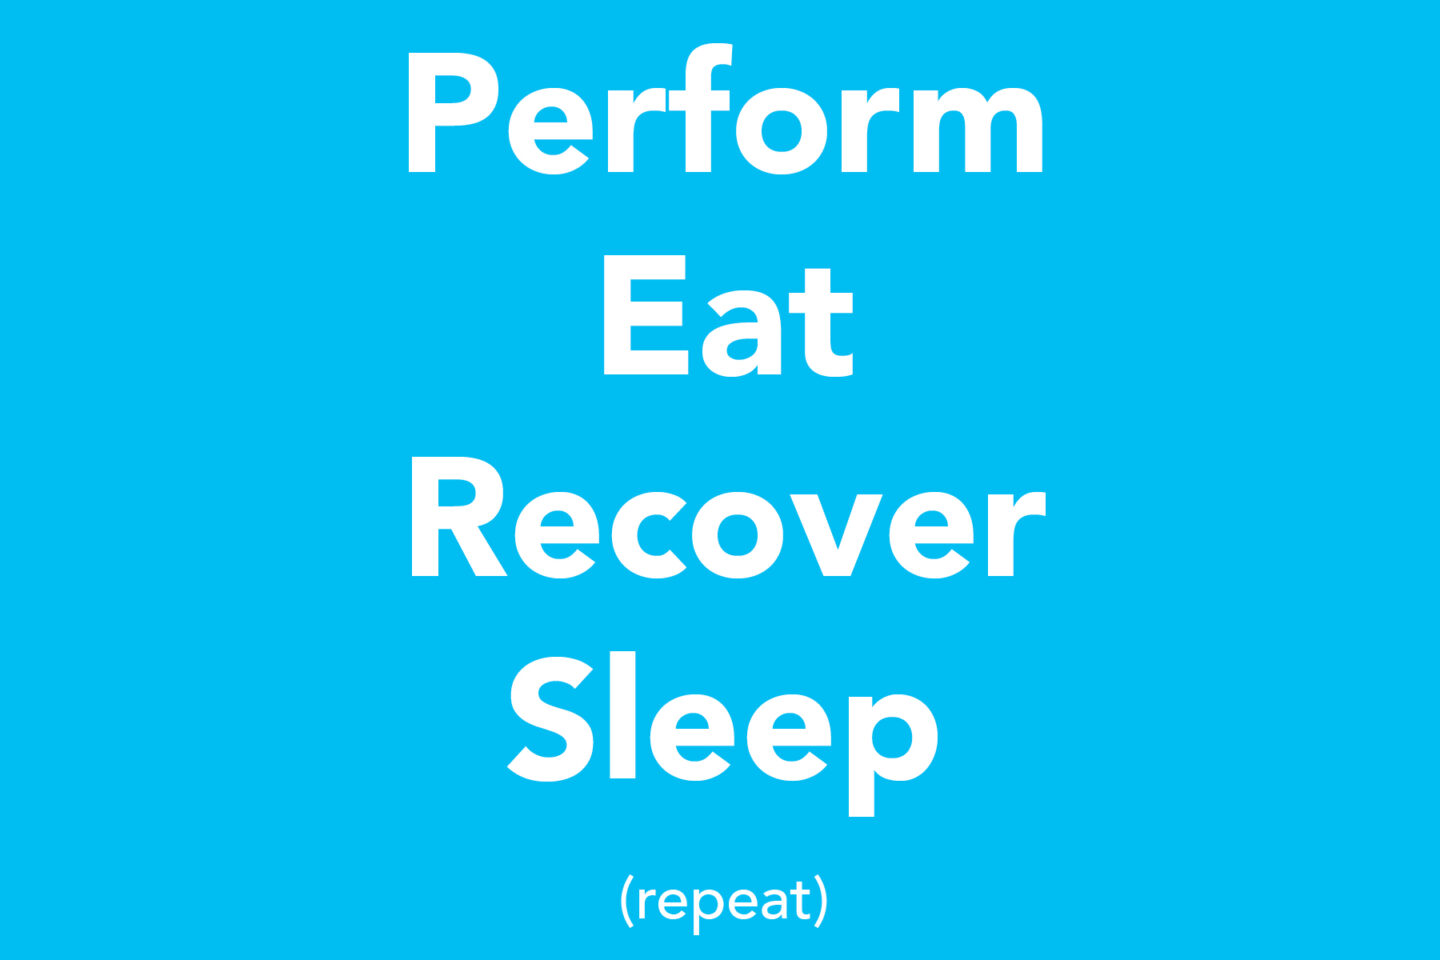 Perform, Eat, Recover, Sleep, Repeat